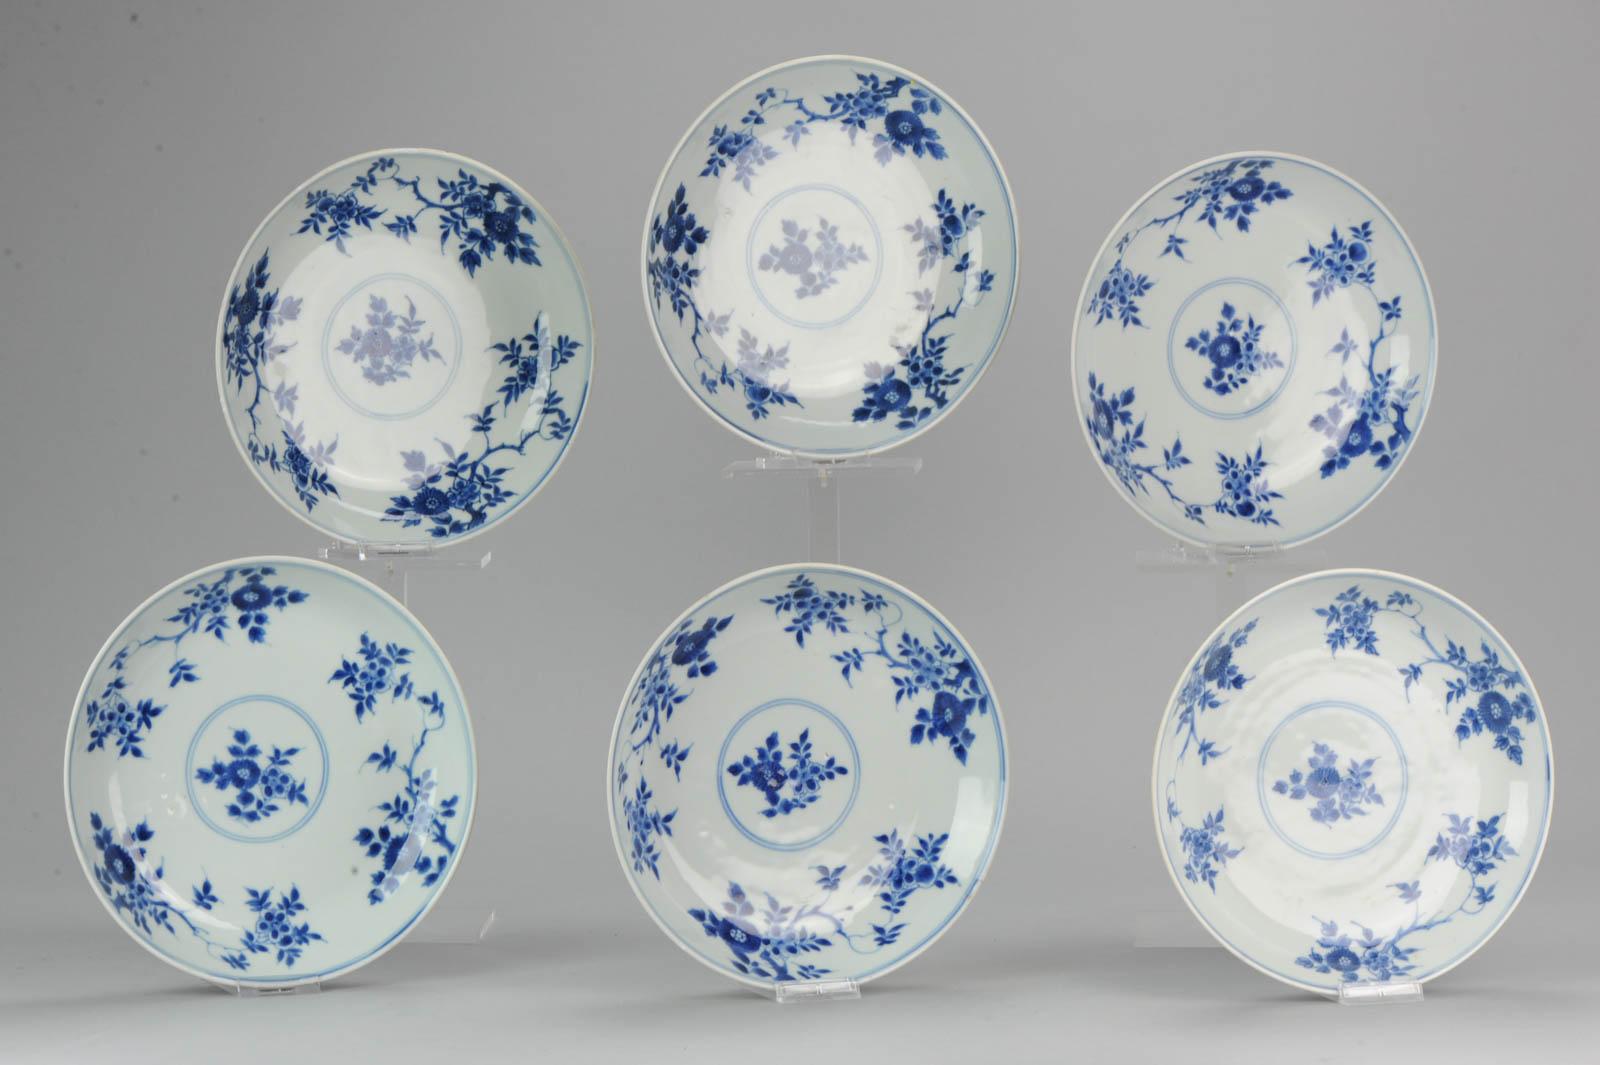 Set of Chinese Blue and White Plate for Wall Decoration Porcelain China 5